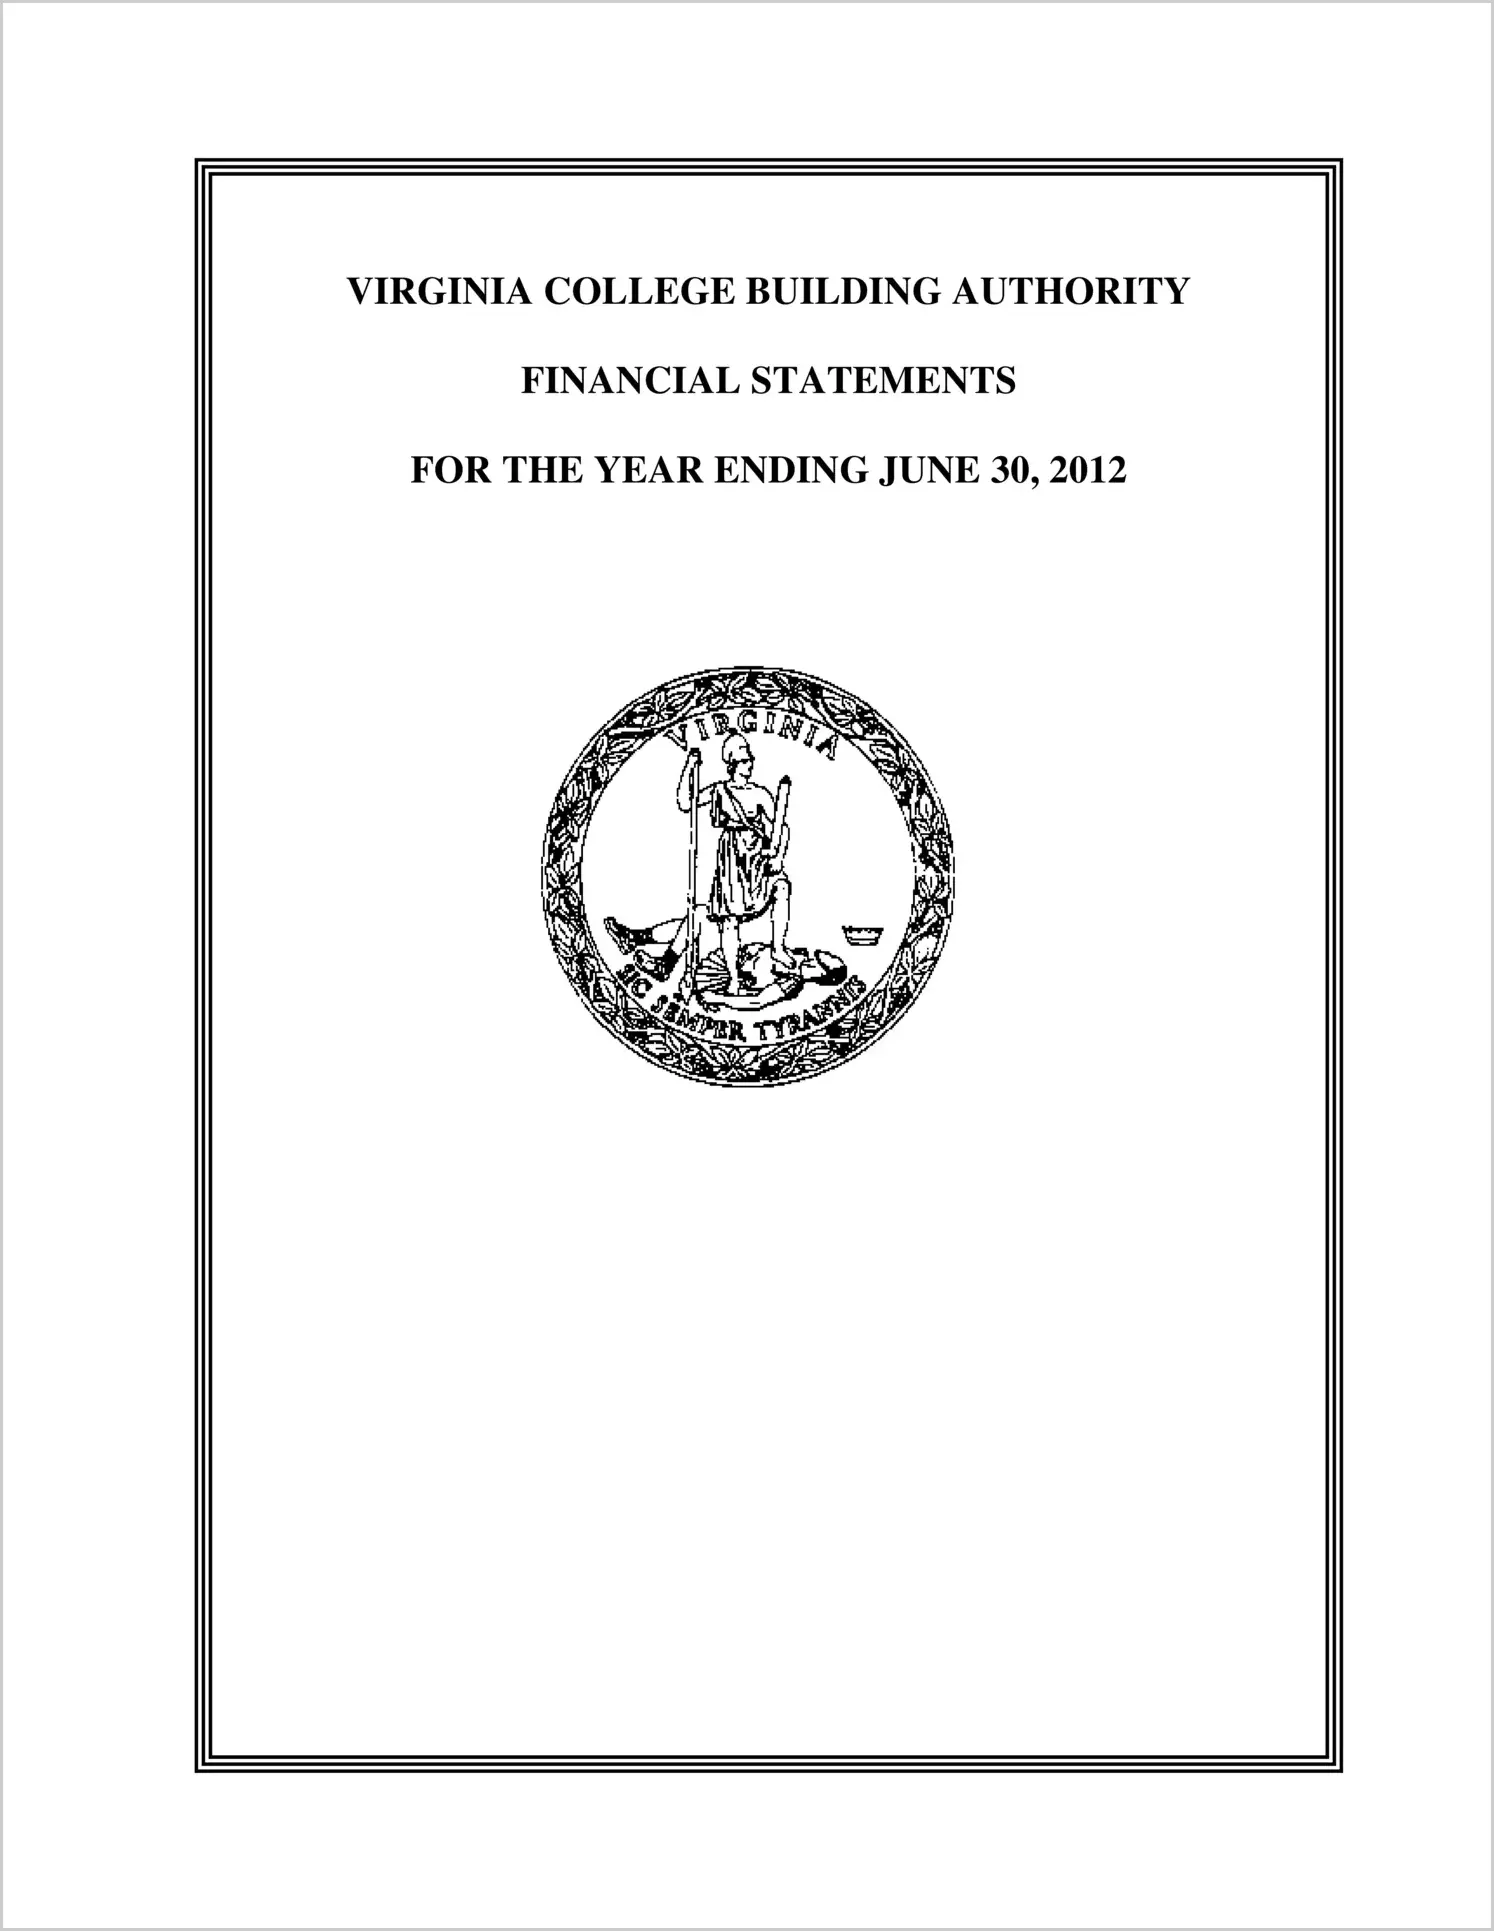 Virginia College Building Authority Financial Statements for the year ended June 30, 2012